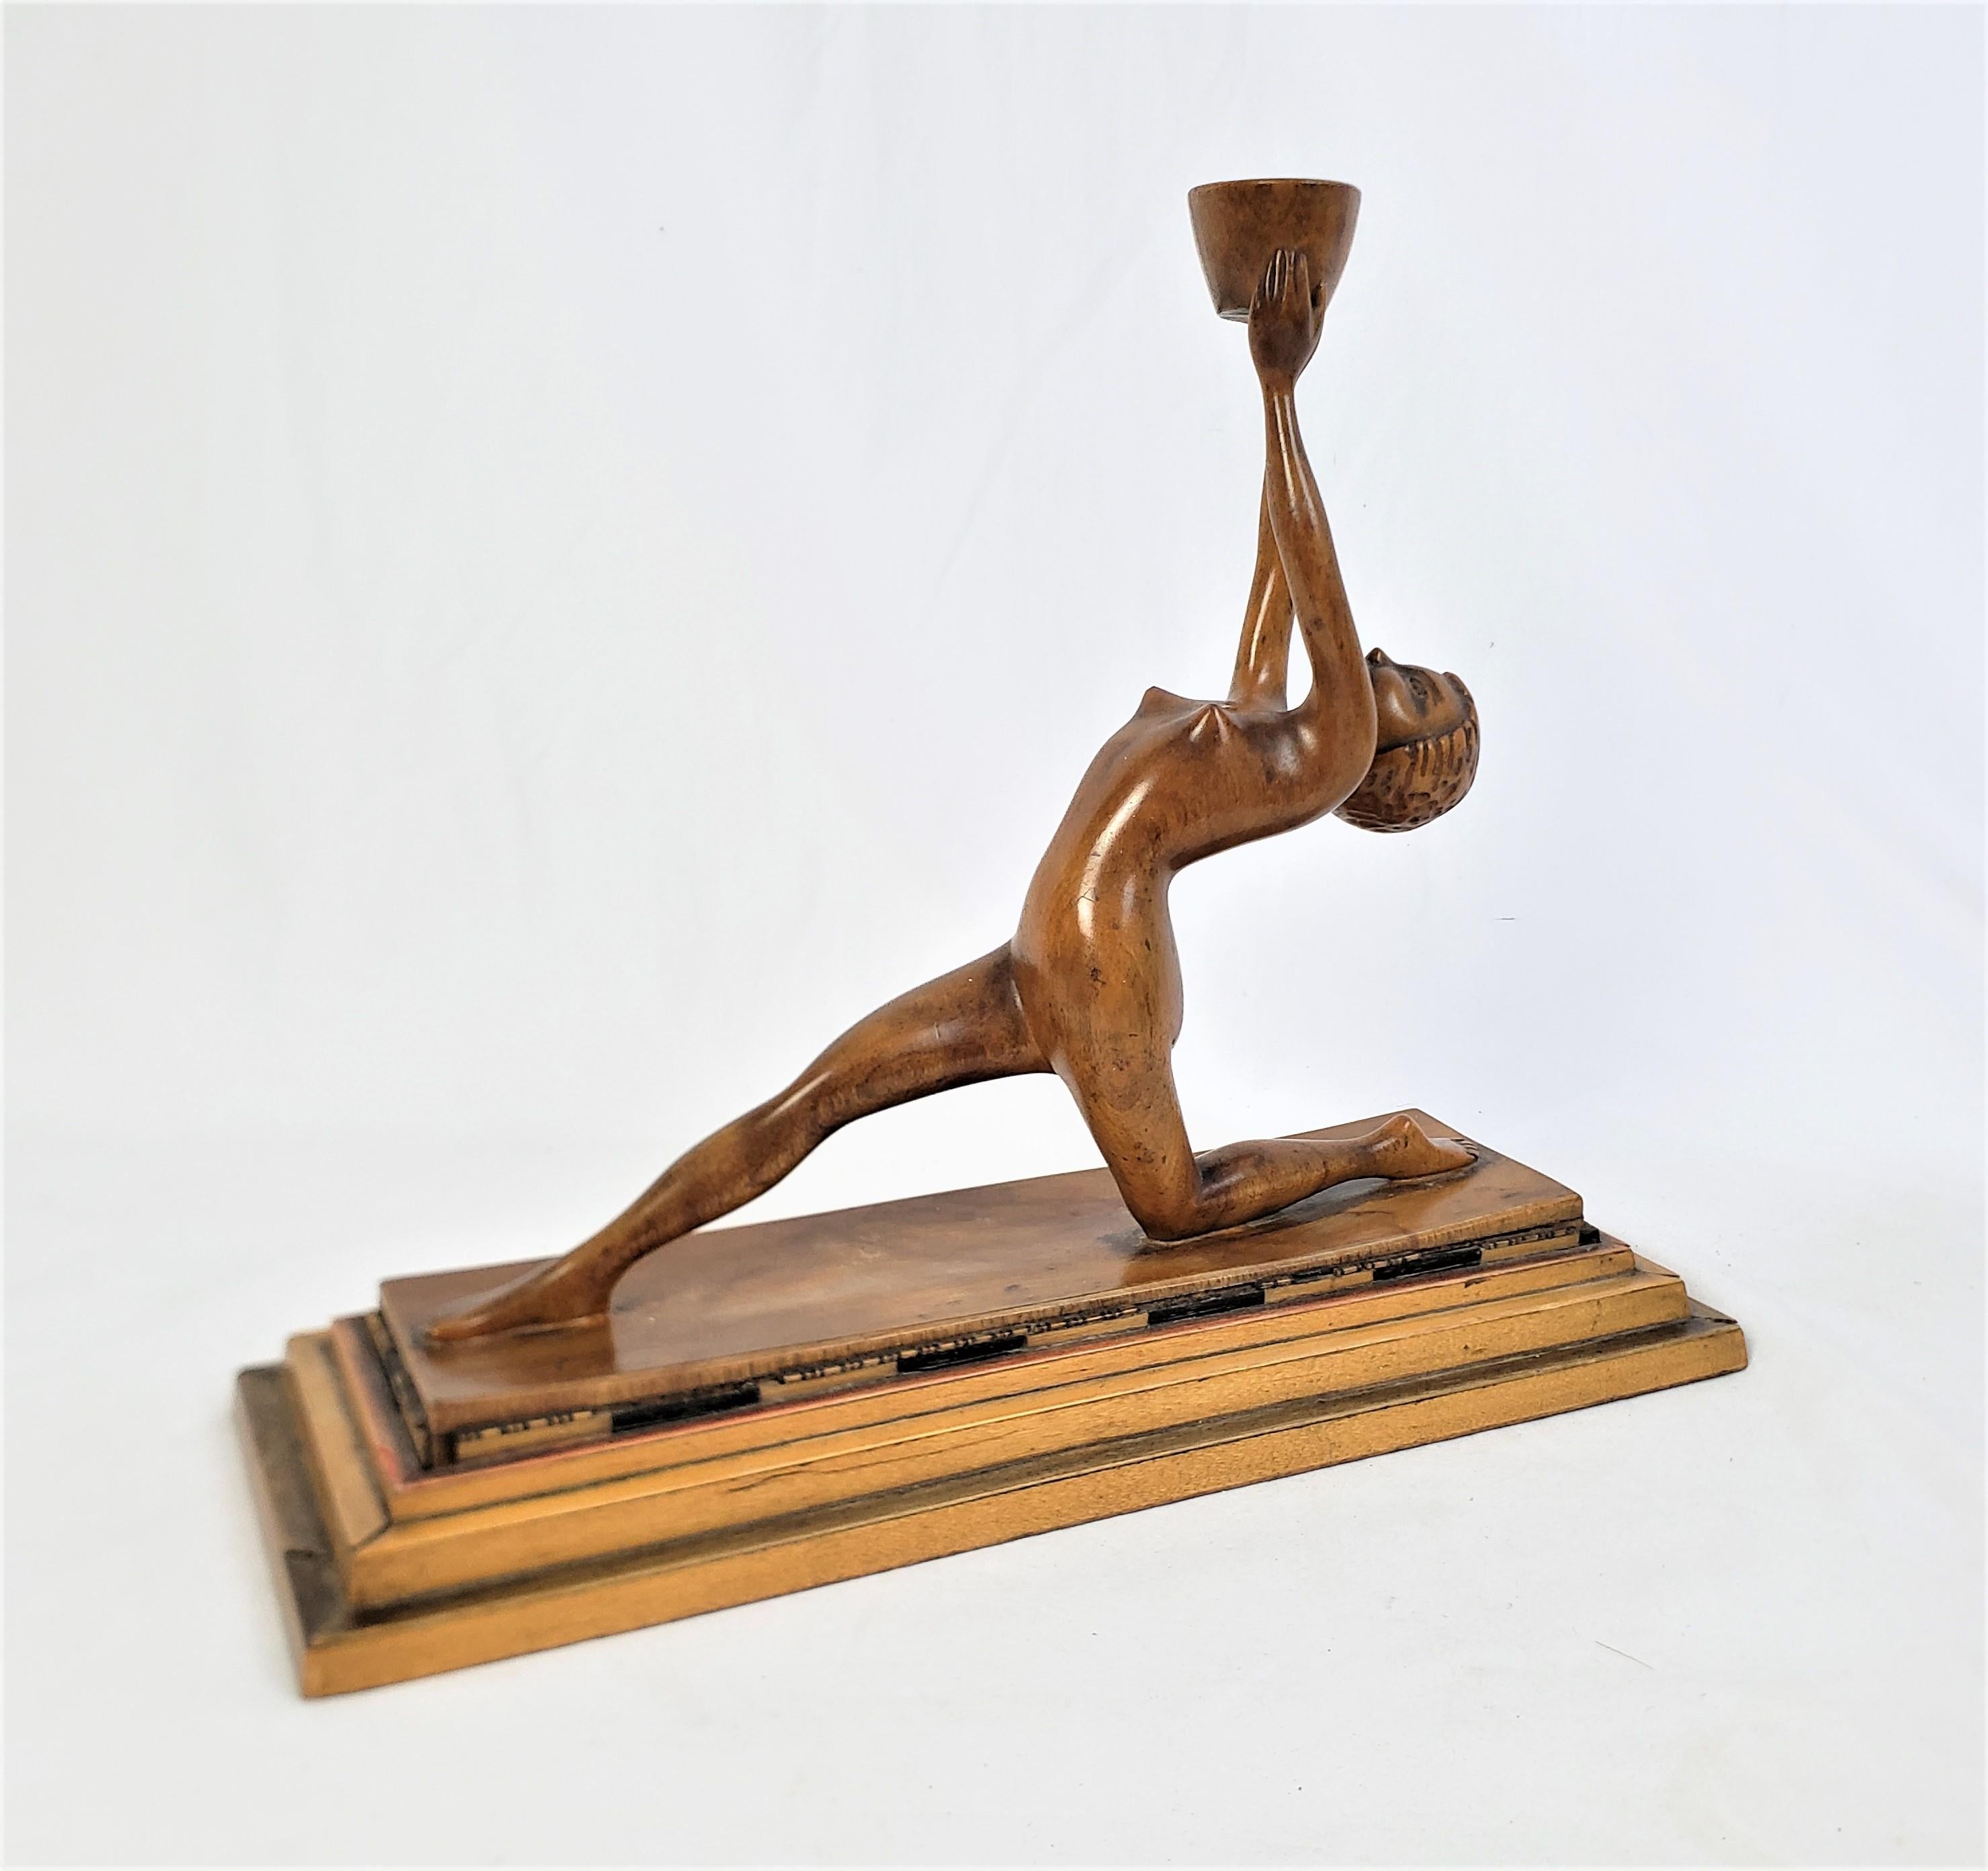 This hand-carved Art Deco sculpture is unsigned, but presumed to have originated from France and date to approximately 1920 and done in the period Art Deco style. The sculpture is done in a softwood and depicts a stylized recling nude female holding